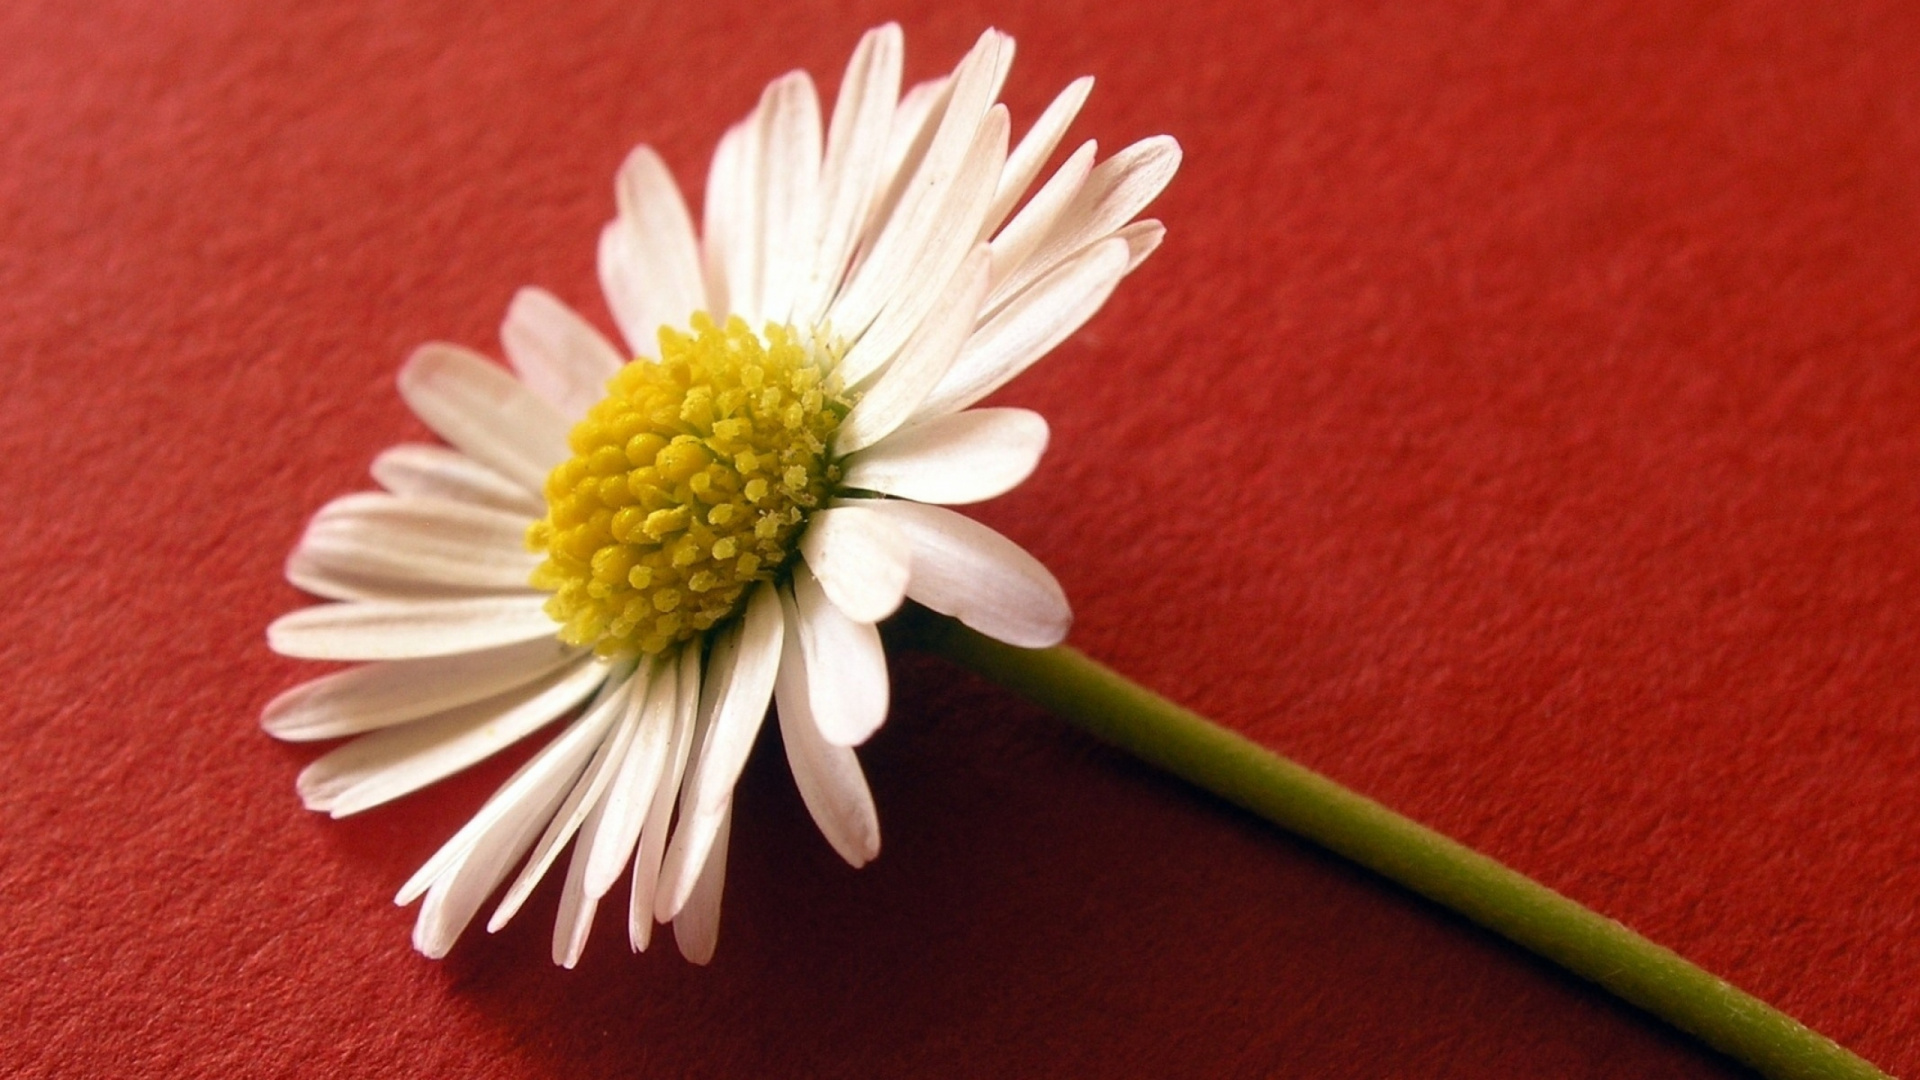 White Daisy on Red Textile. Wallpaper in 1920x1080 Resolution